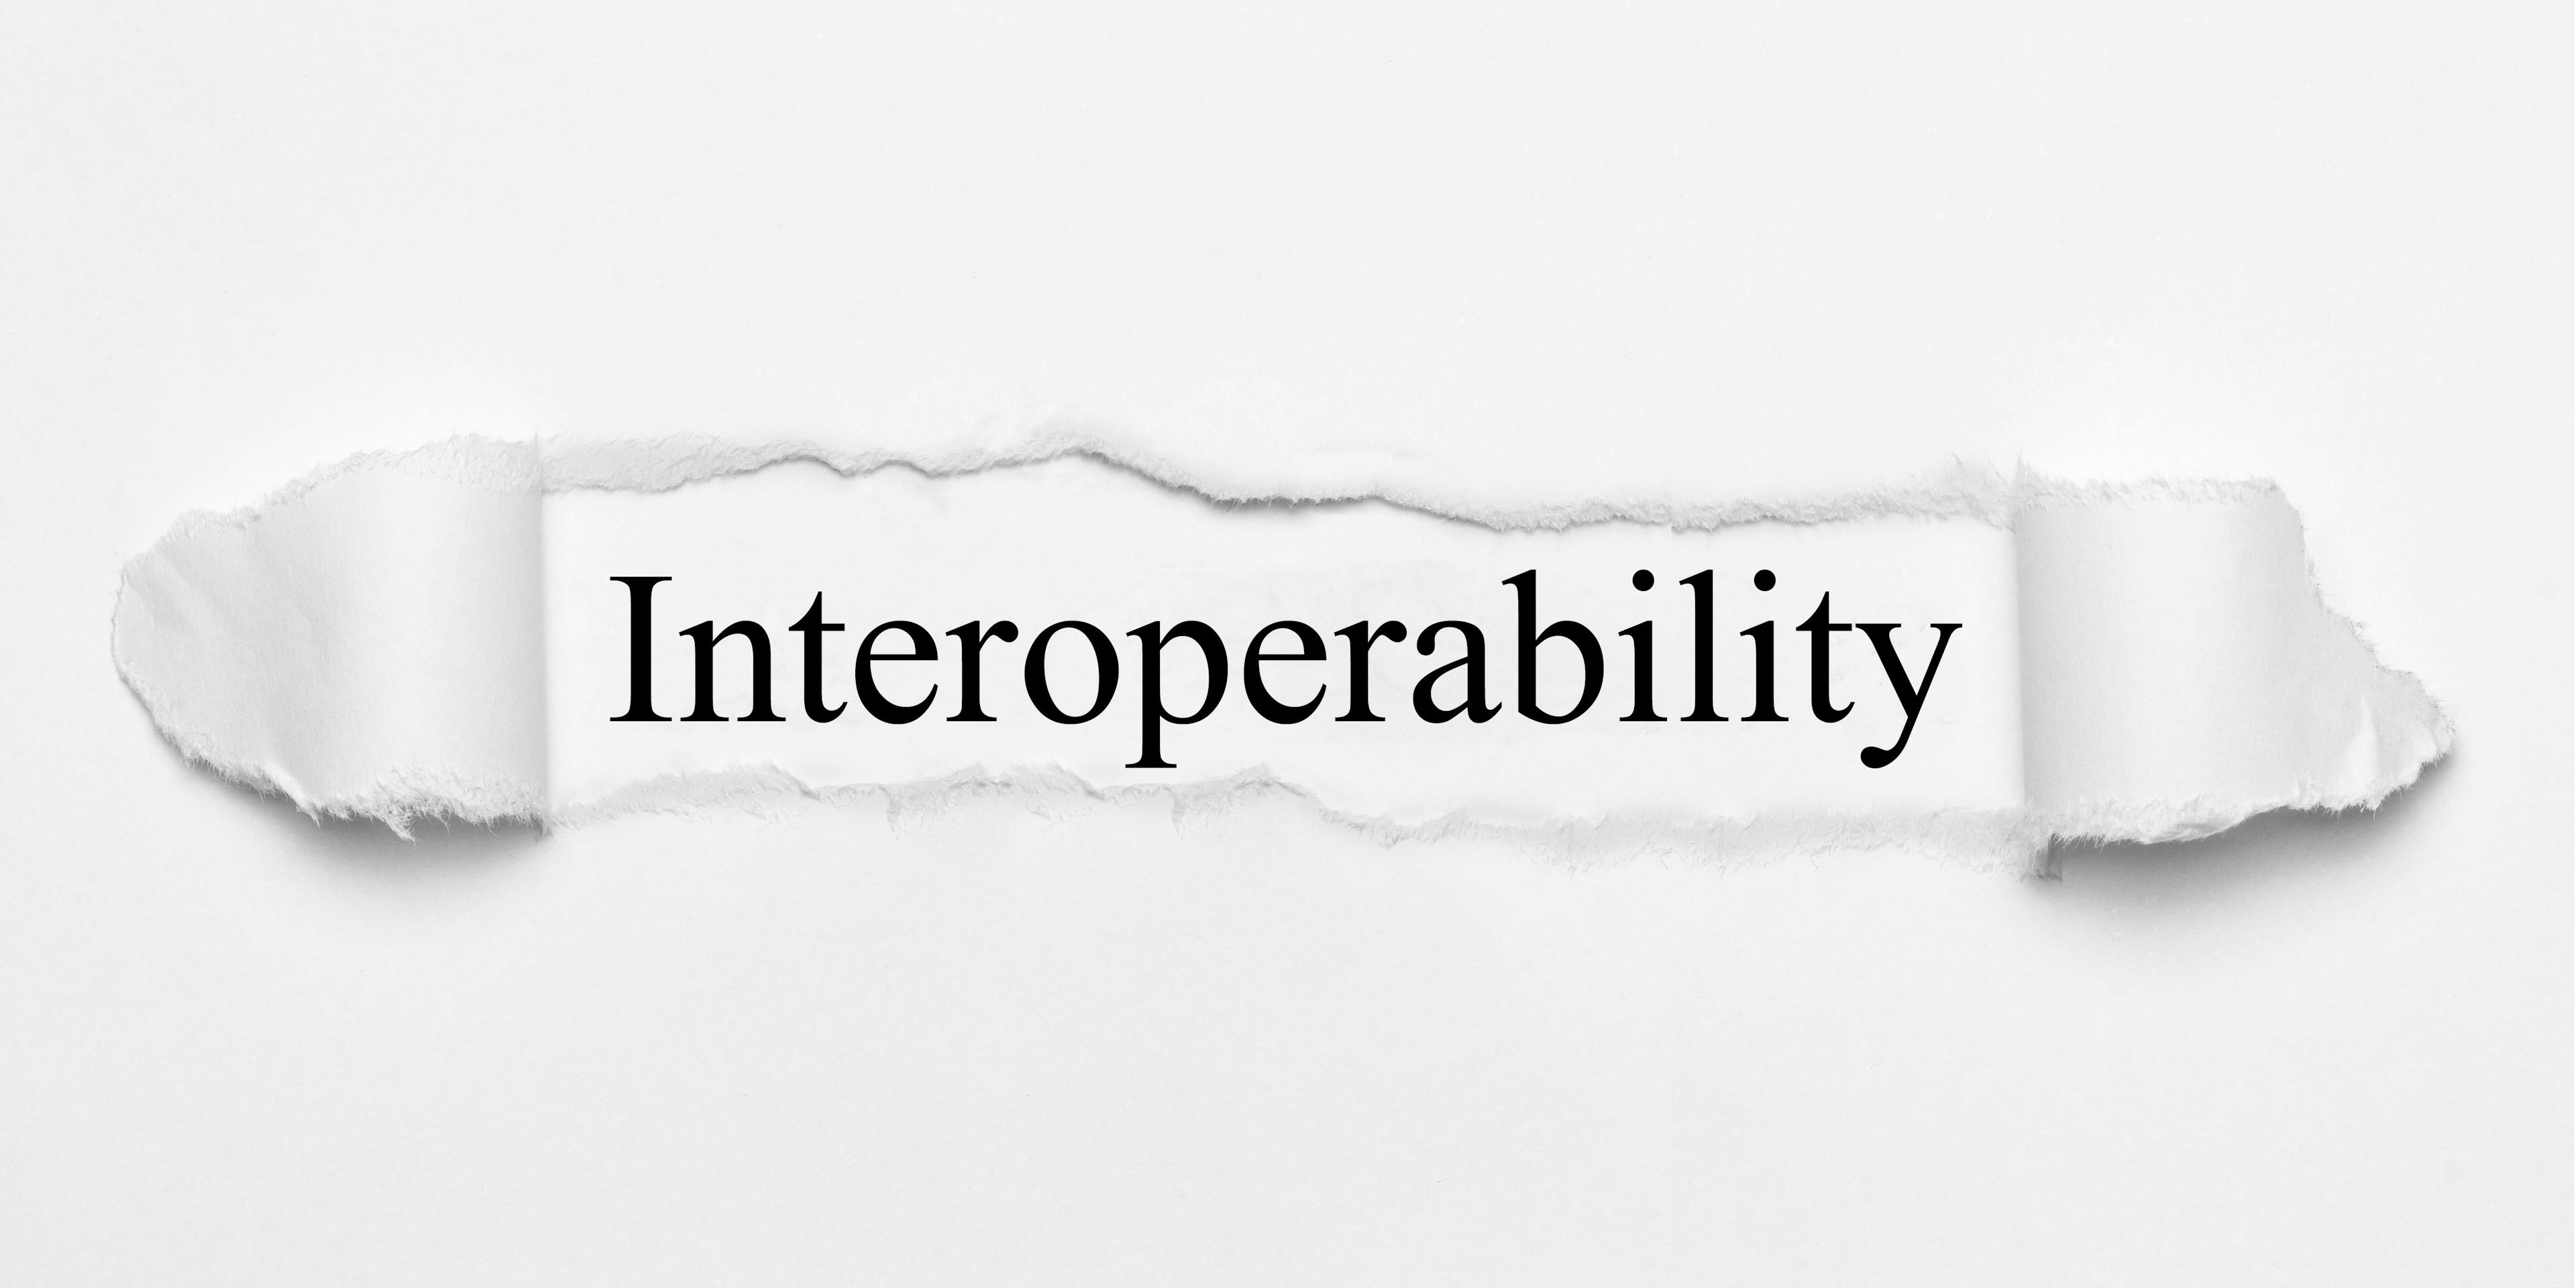 Let’s Stop Talking About Interoperability and Just Make it Work